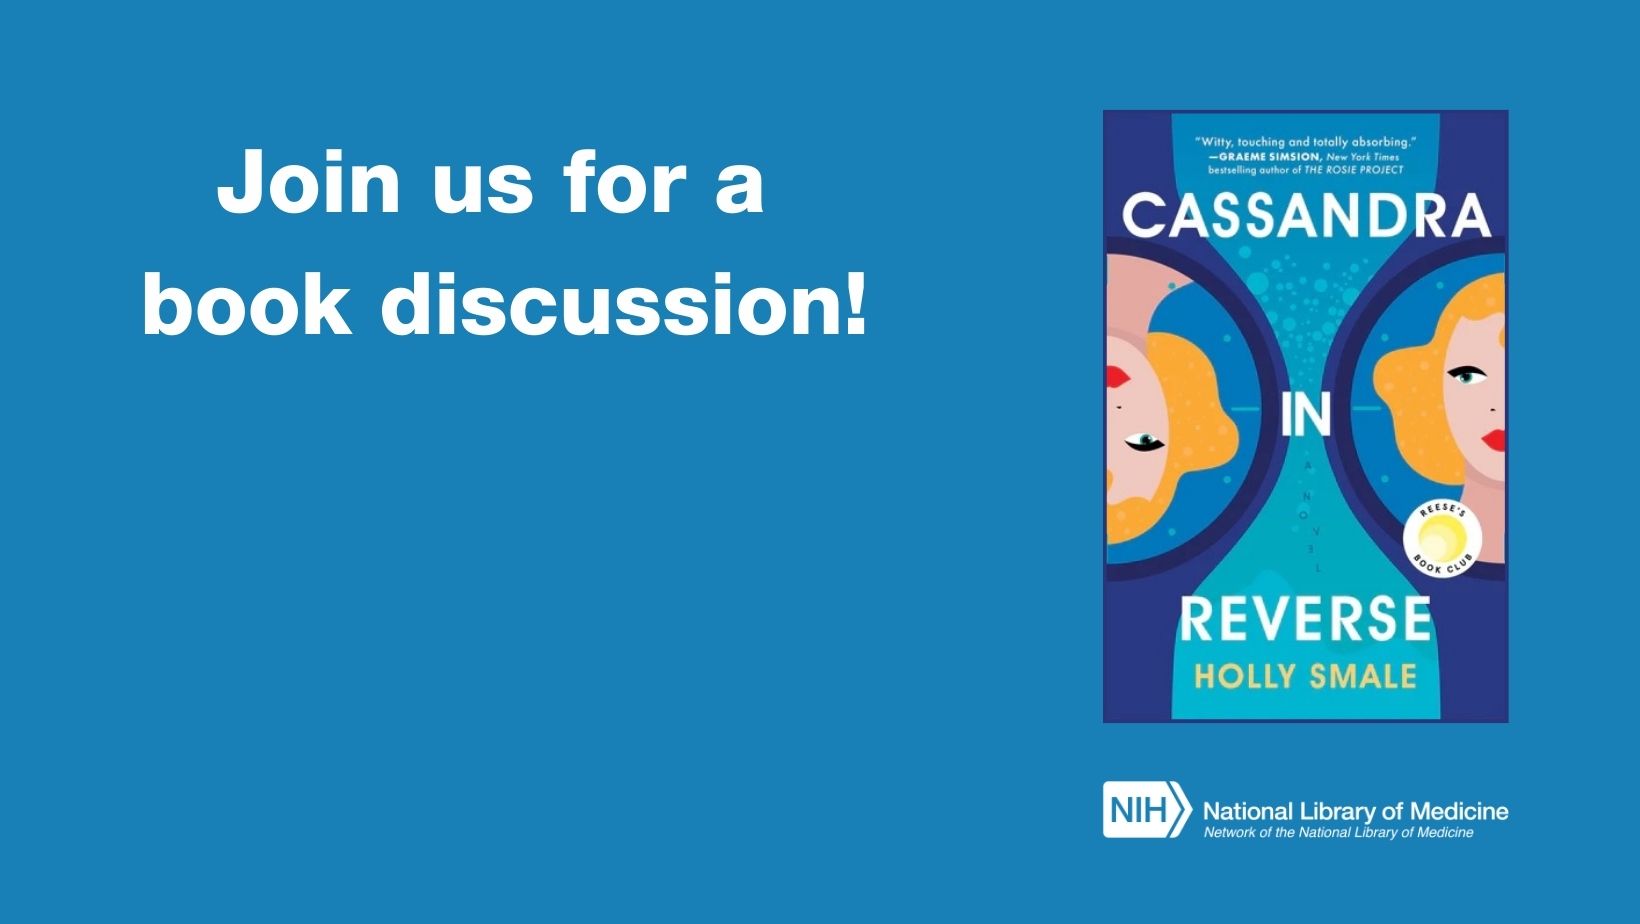 Join us for a book discussion of Cassandra in Reverse